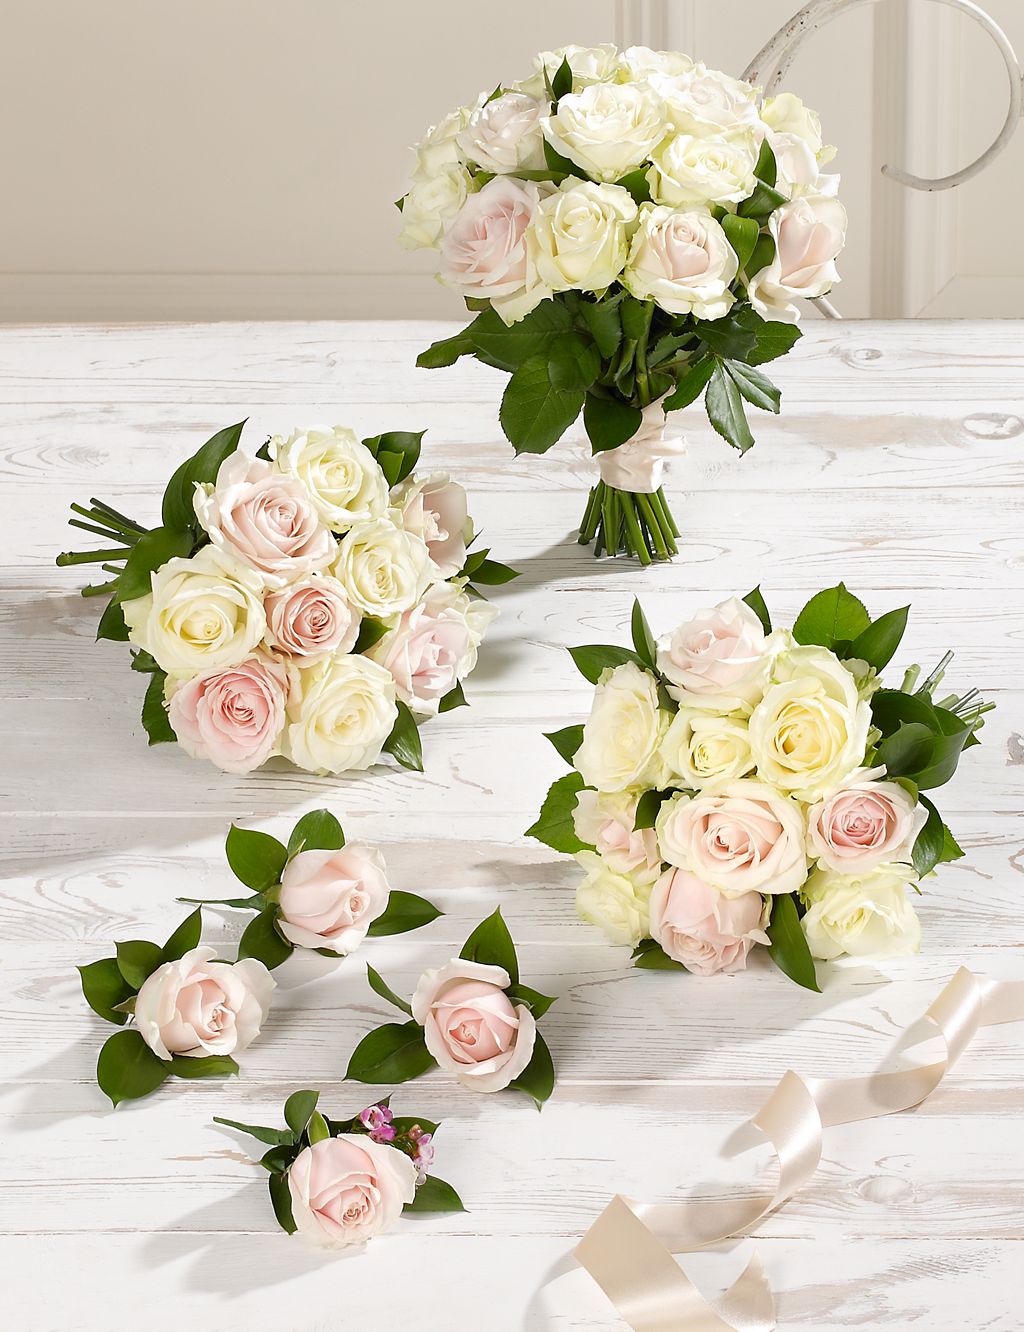 White & Pink Luxury Rose Wedding Flowers - Collection 2 1 of 1